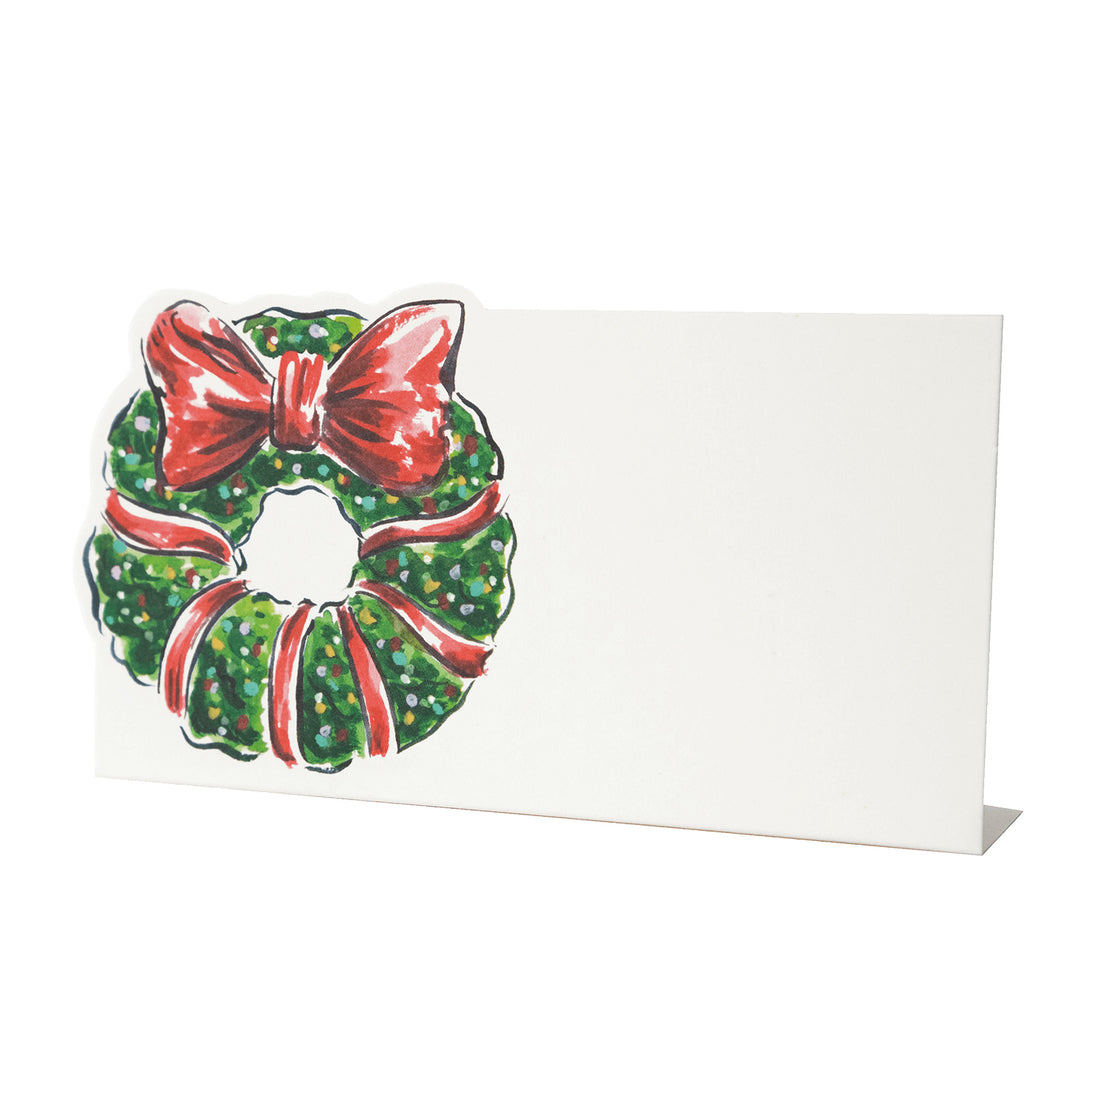 A white, rectangular freestanding place card featuring an illustrated Christmas Wreath with a red bow adorning the left side.